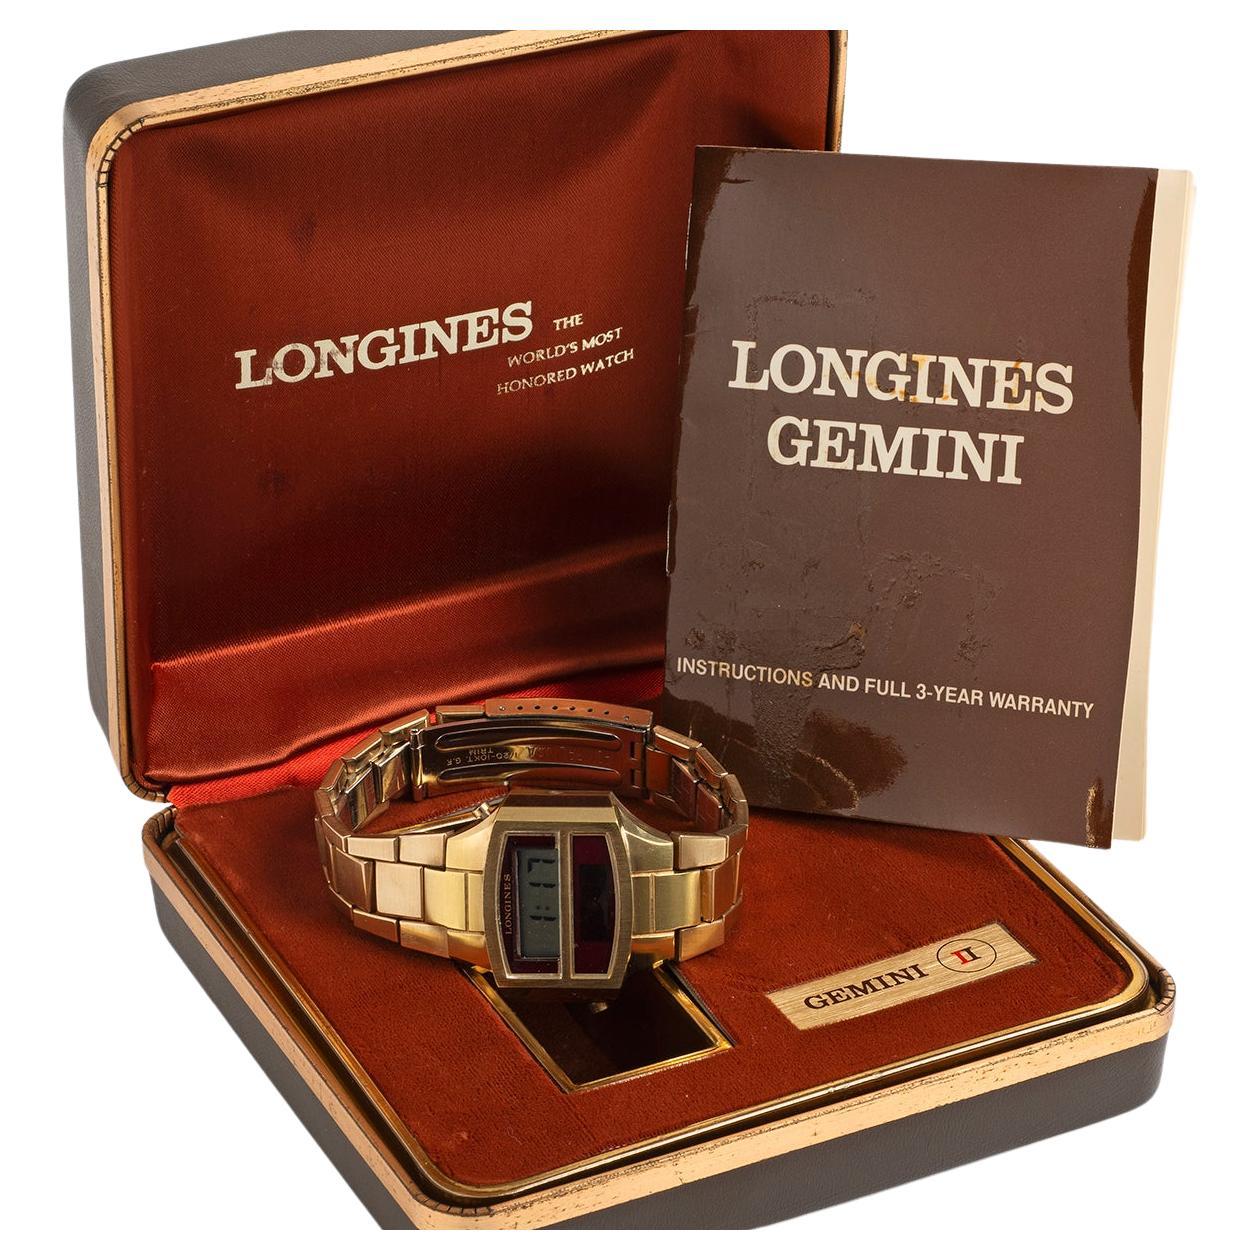 Our extremely rare and complete vintage Longines Gemini II features a 35.4 mm case and bracelet in heavy gold plated steel. The Gemini by Longines was the first watch to simultaneously provide a digital time readout in day and night, as the lower